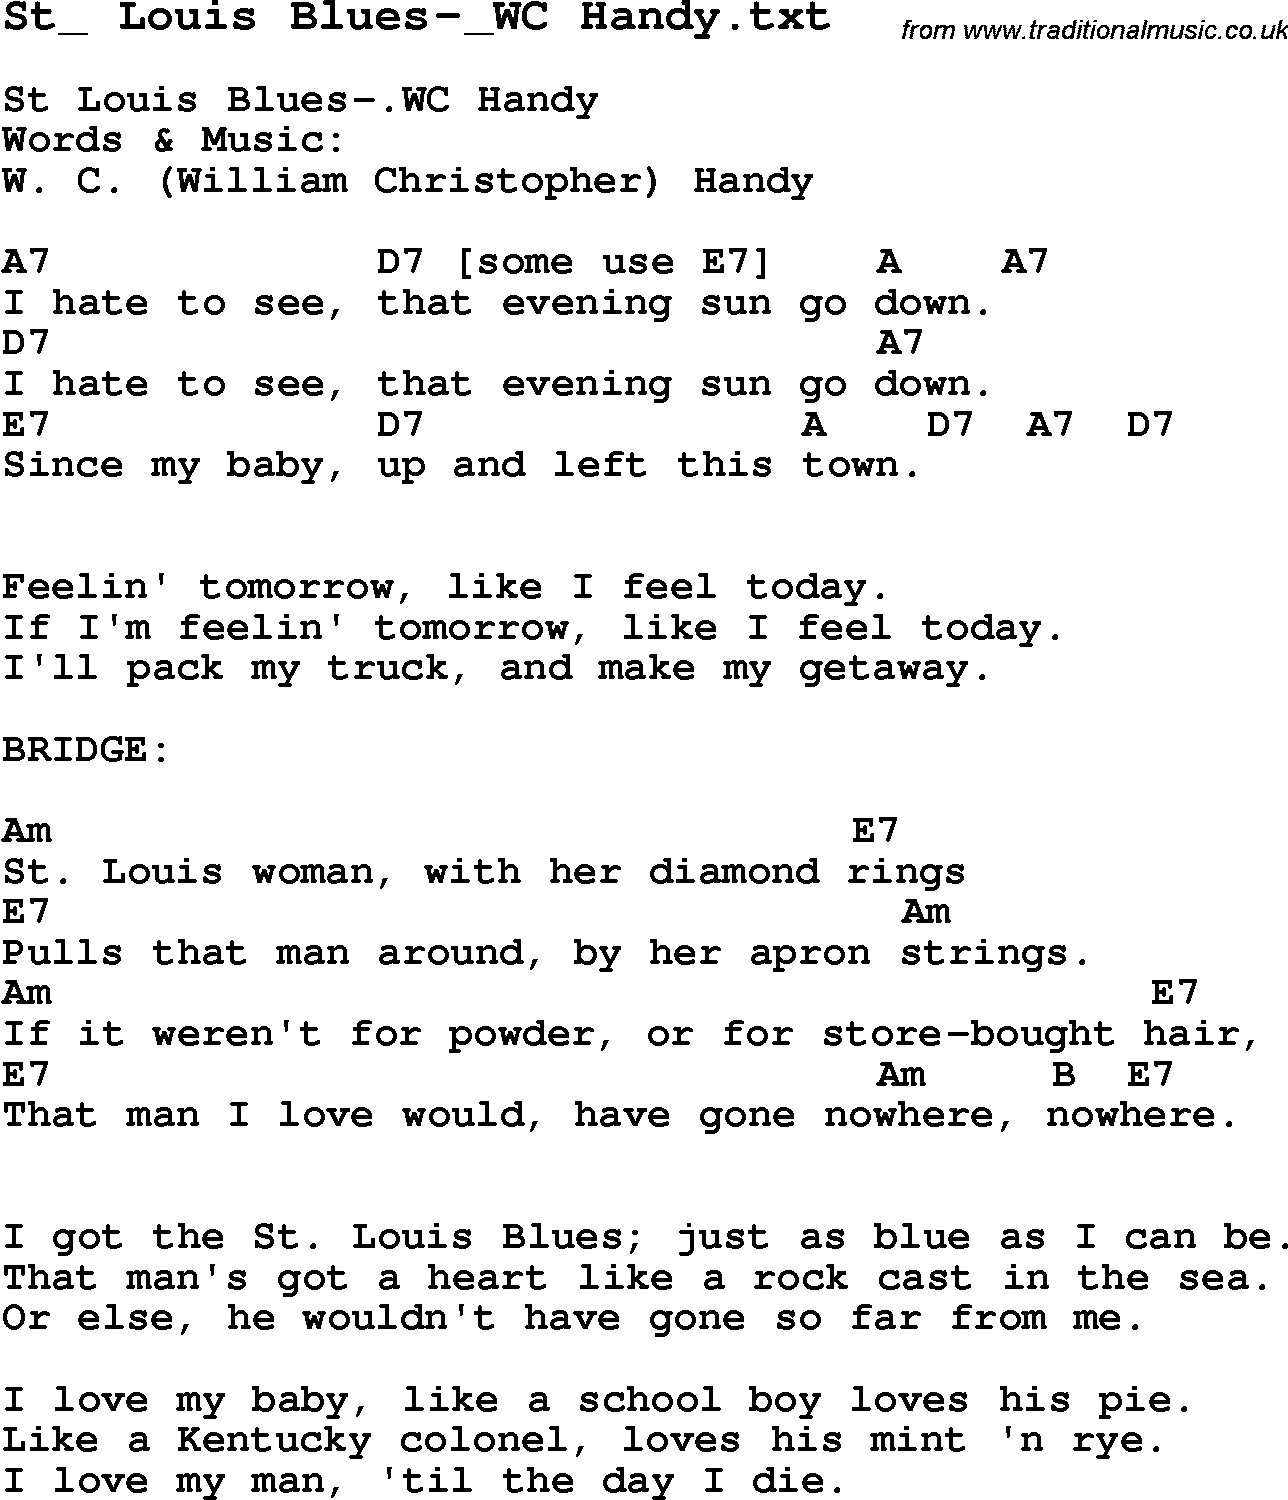 Jazz Song - St_ Louis Blues-_WC Handy with Chords, Tabs and Lyrics from top bands and artists